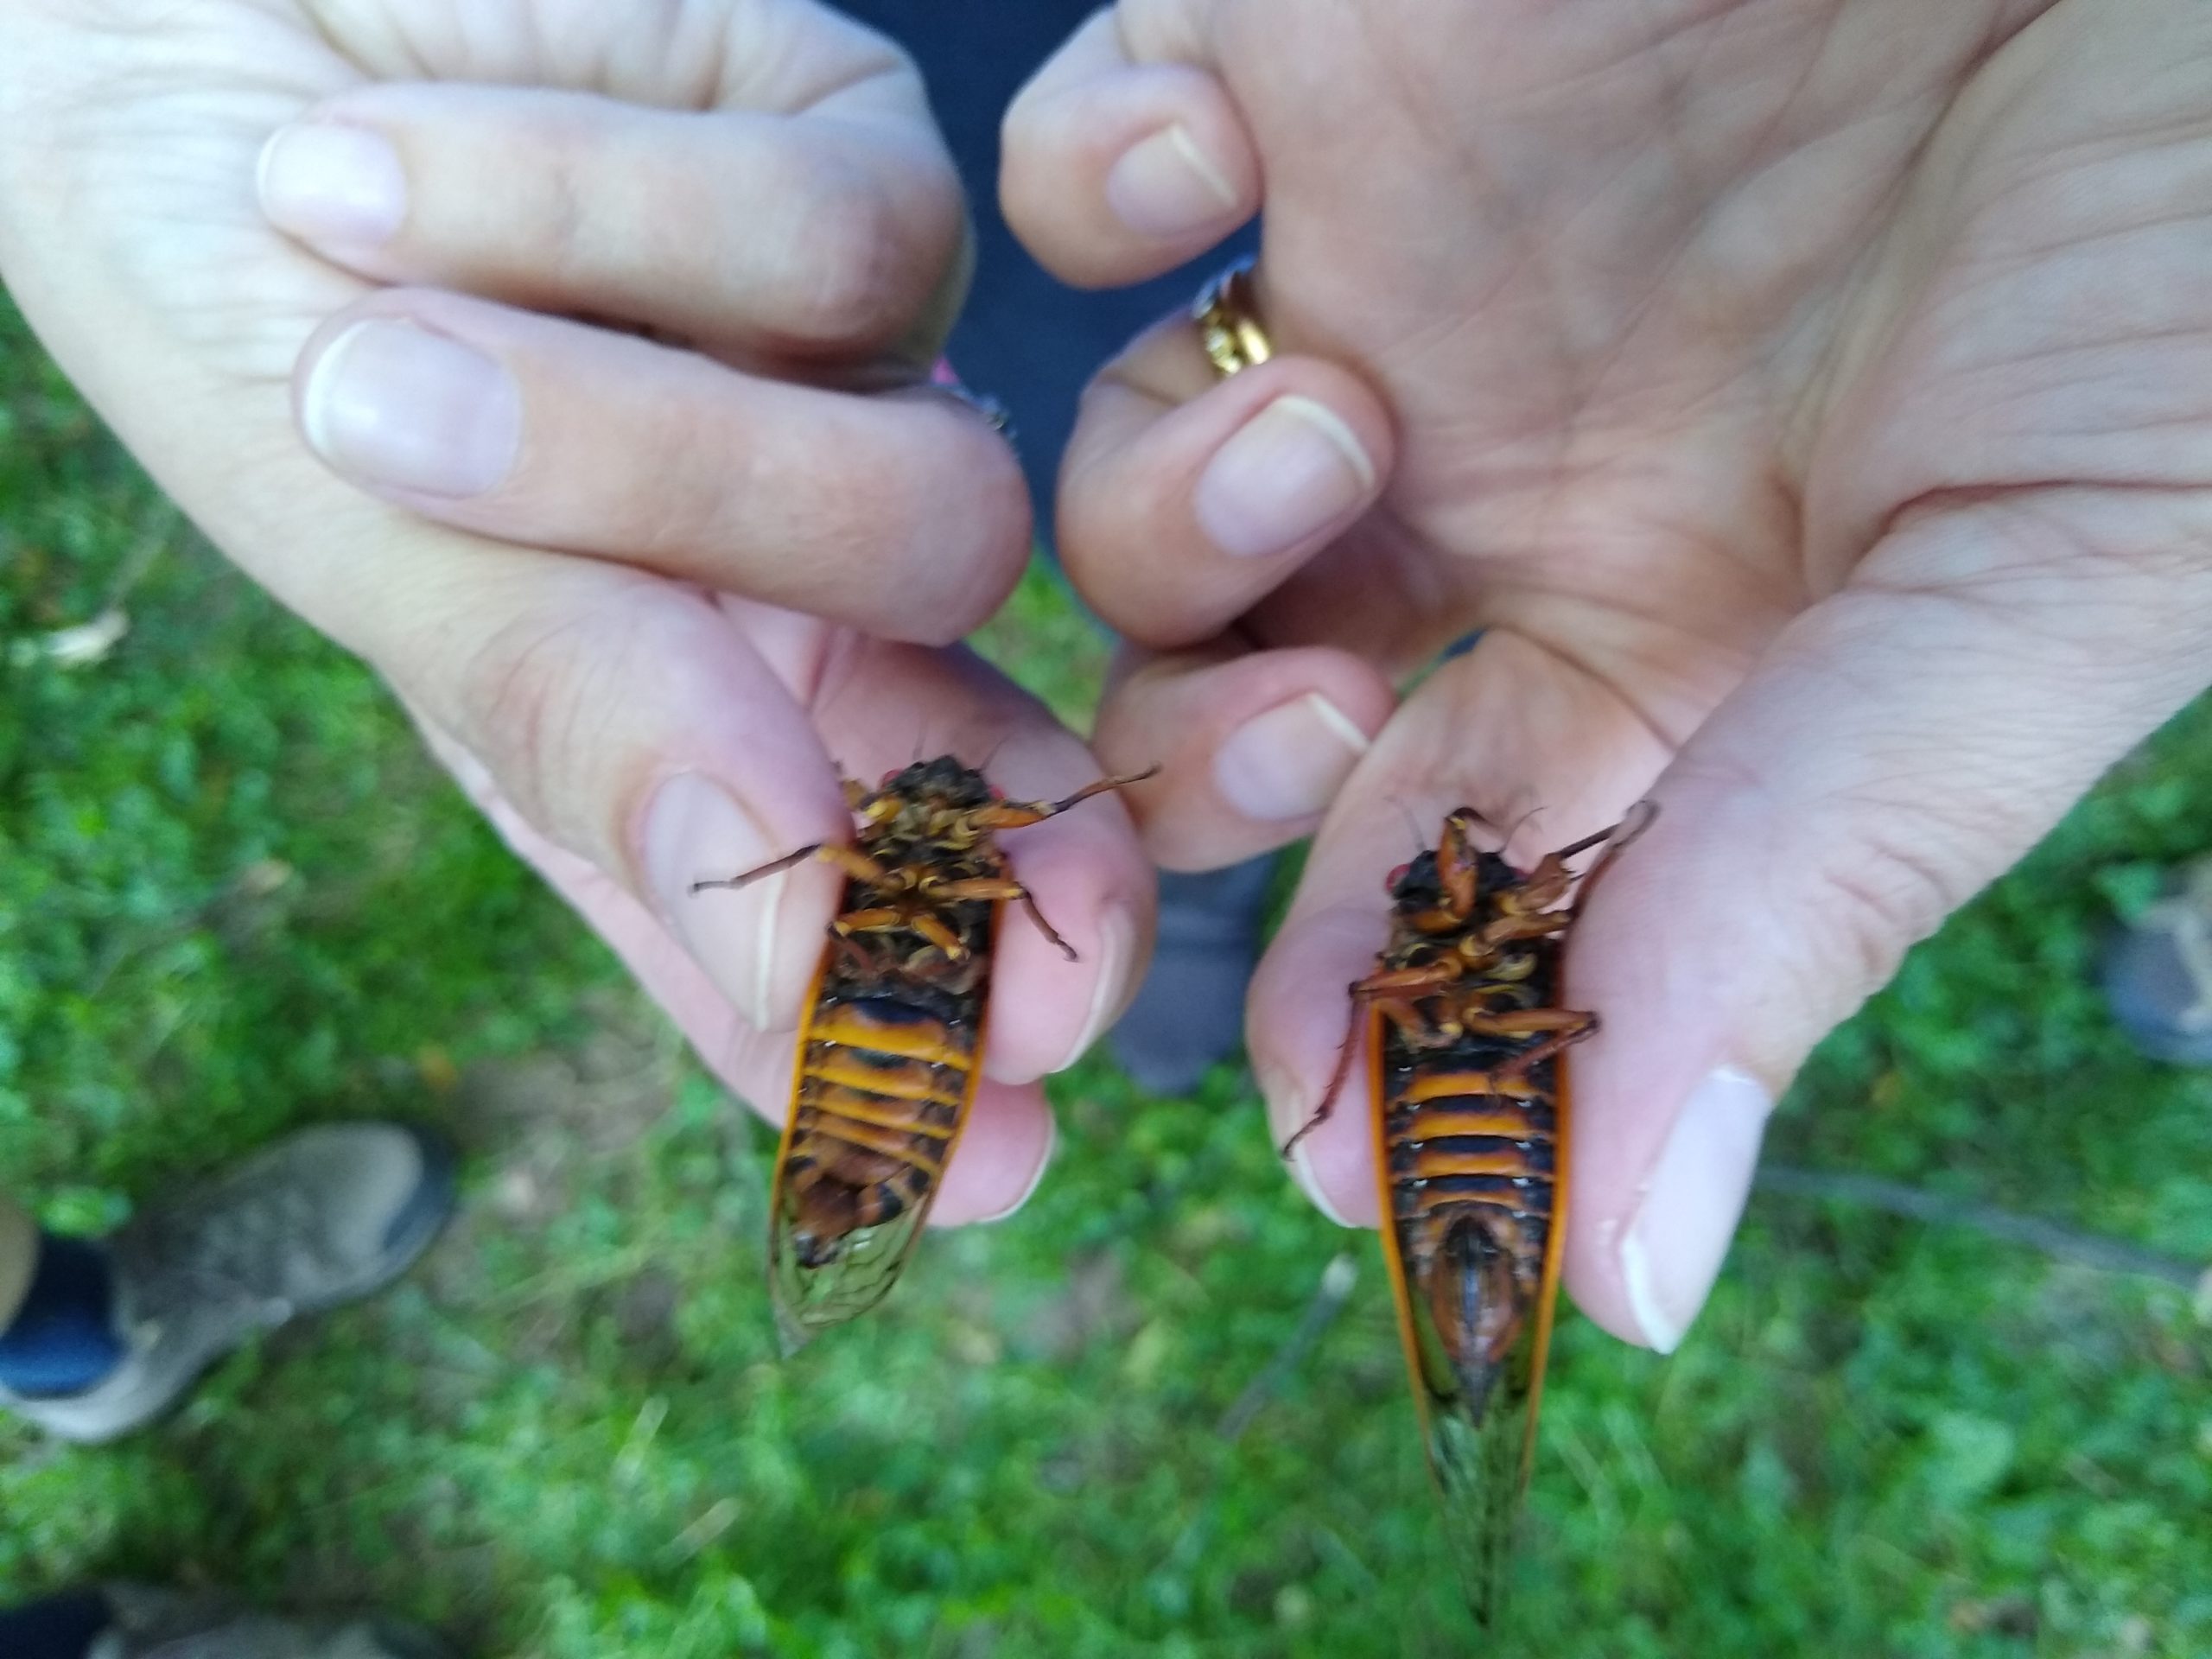 Subtle differences between two cicadas